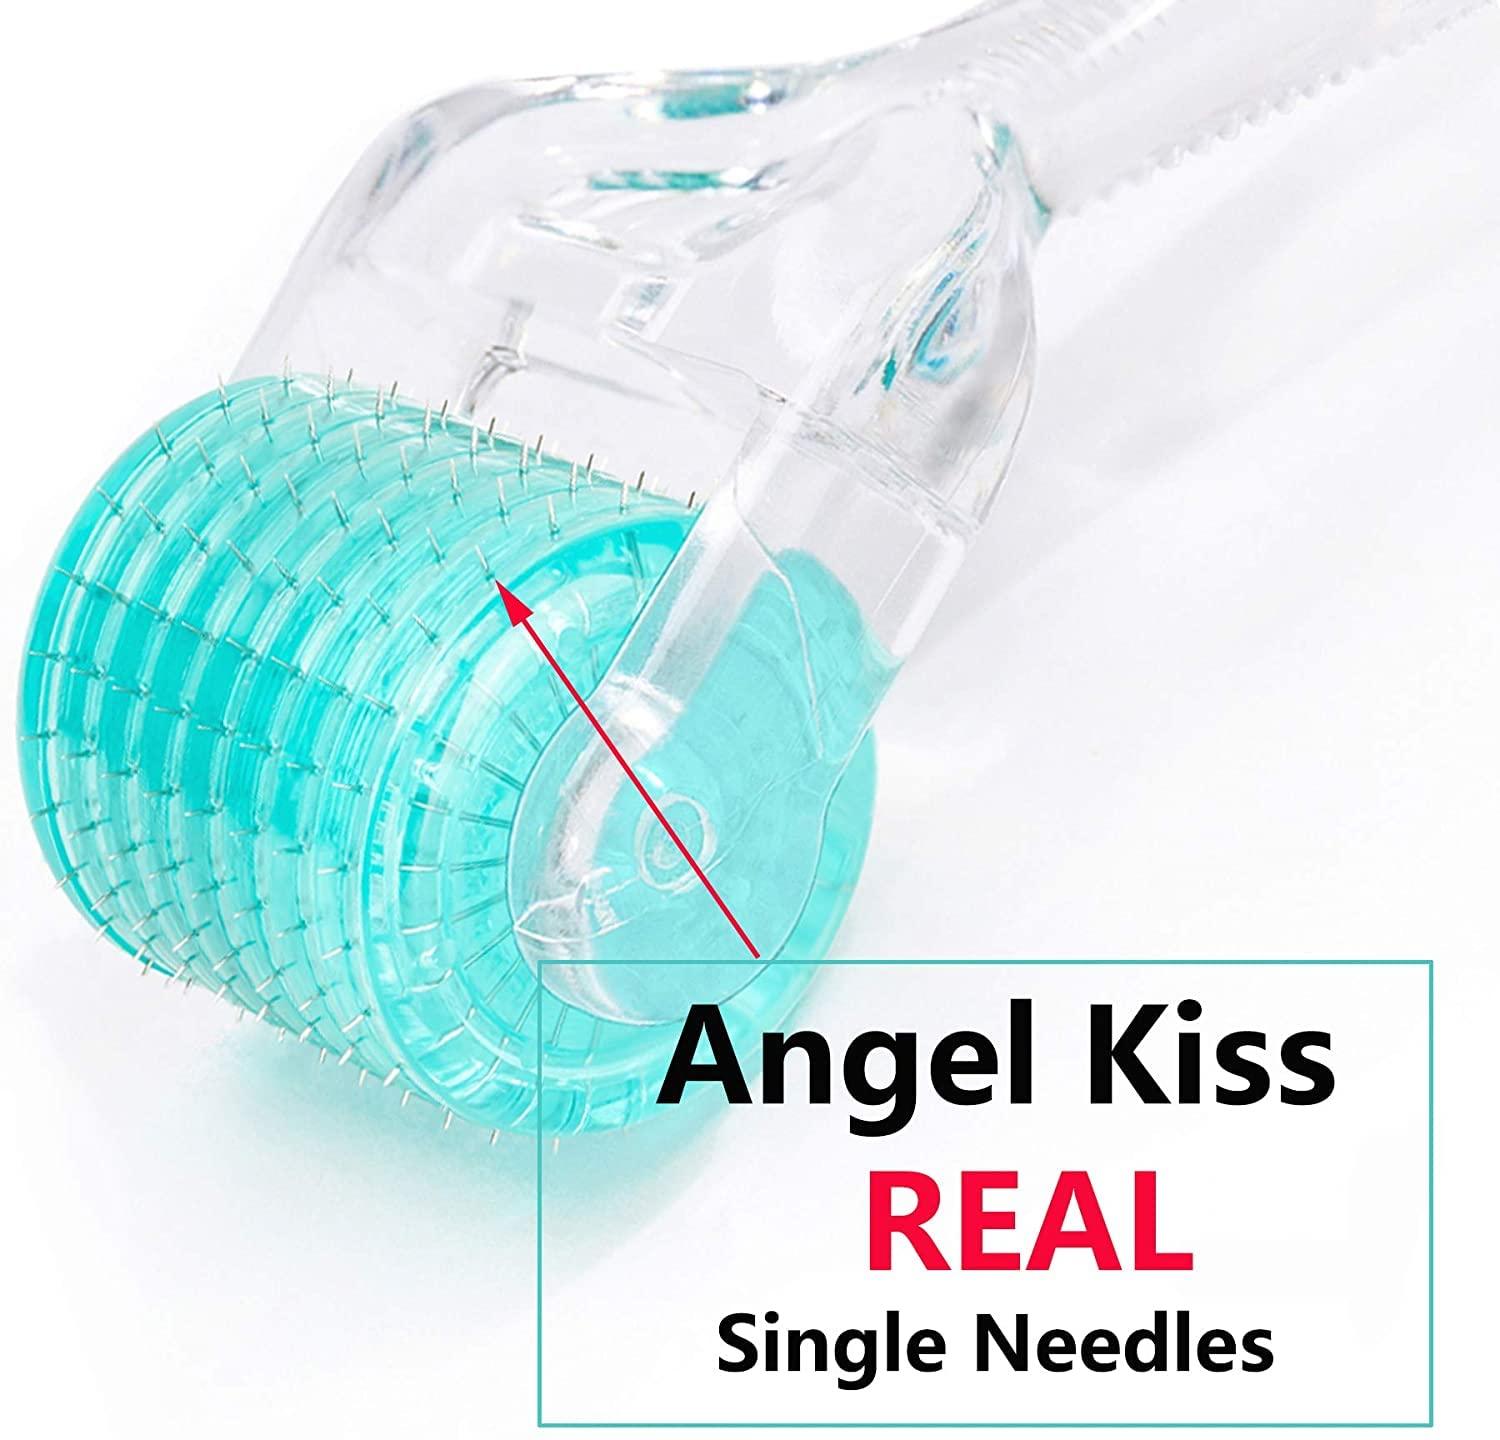 REAL NEEDLES Derma Roller - Angel Kiss 192 Advanced Version1.0  Microneedling Roller for Body Beard Face - Stainless Steel Needles -  Microdermabrasion Tool for Glowing Skin - Includes Storage Case